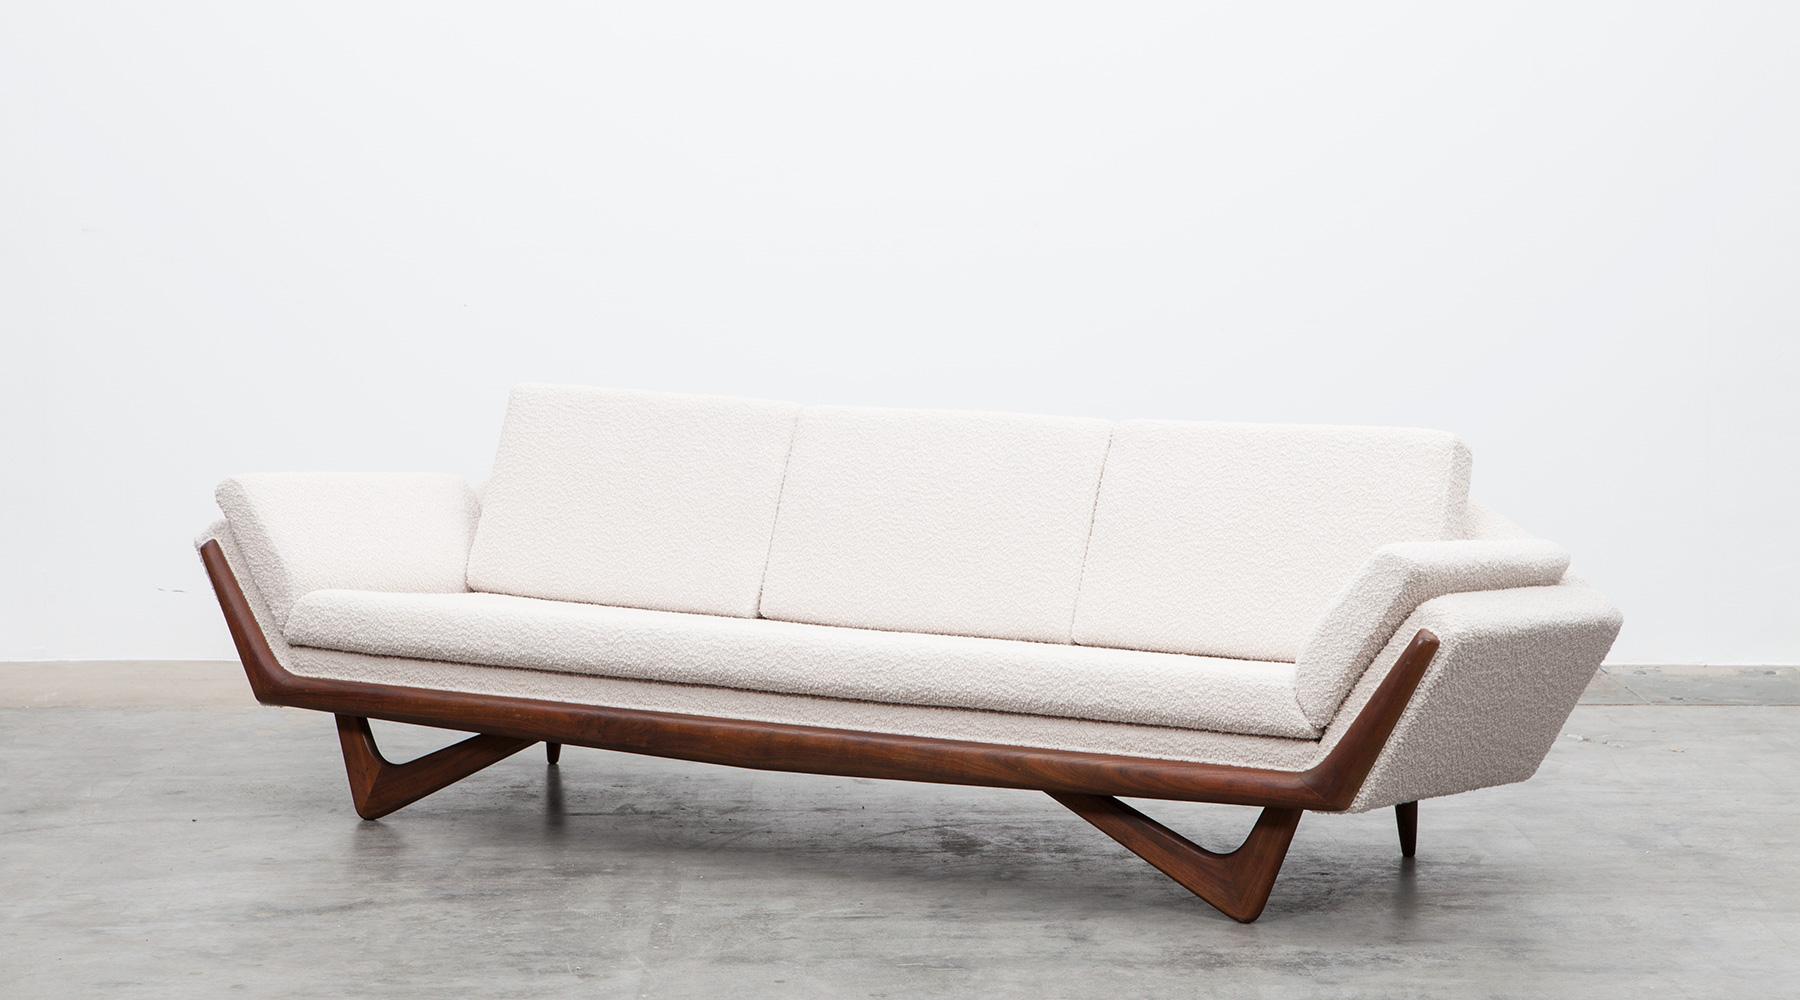 New upholstery in off white fabric, walnut base, Sofa by Adrian Pearsall, USA, 1965.

Very unique sofa designed by Adrian Pearsall. The sofa comes new upholstered in off white high-quality fabric. The complex construction of the legs is walnut.